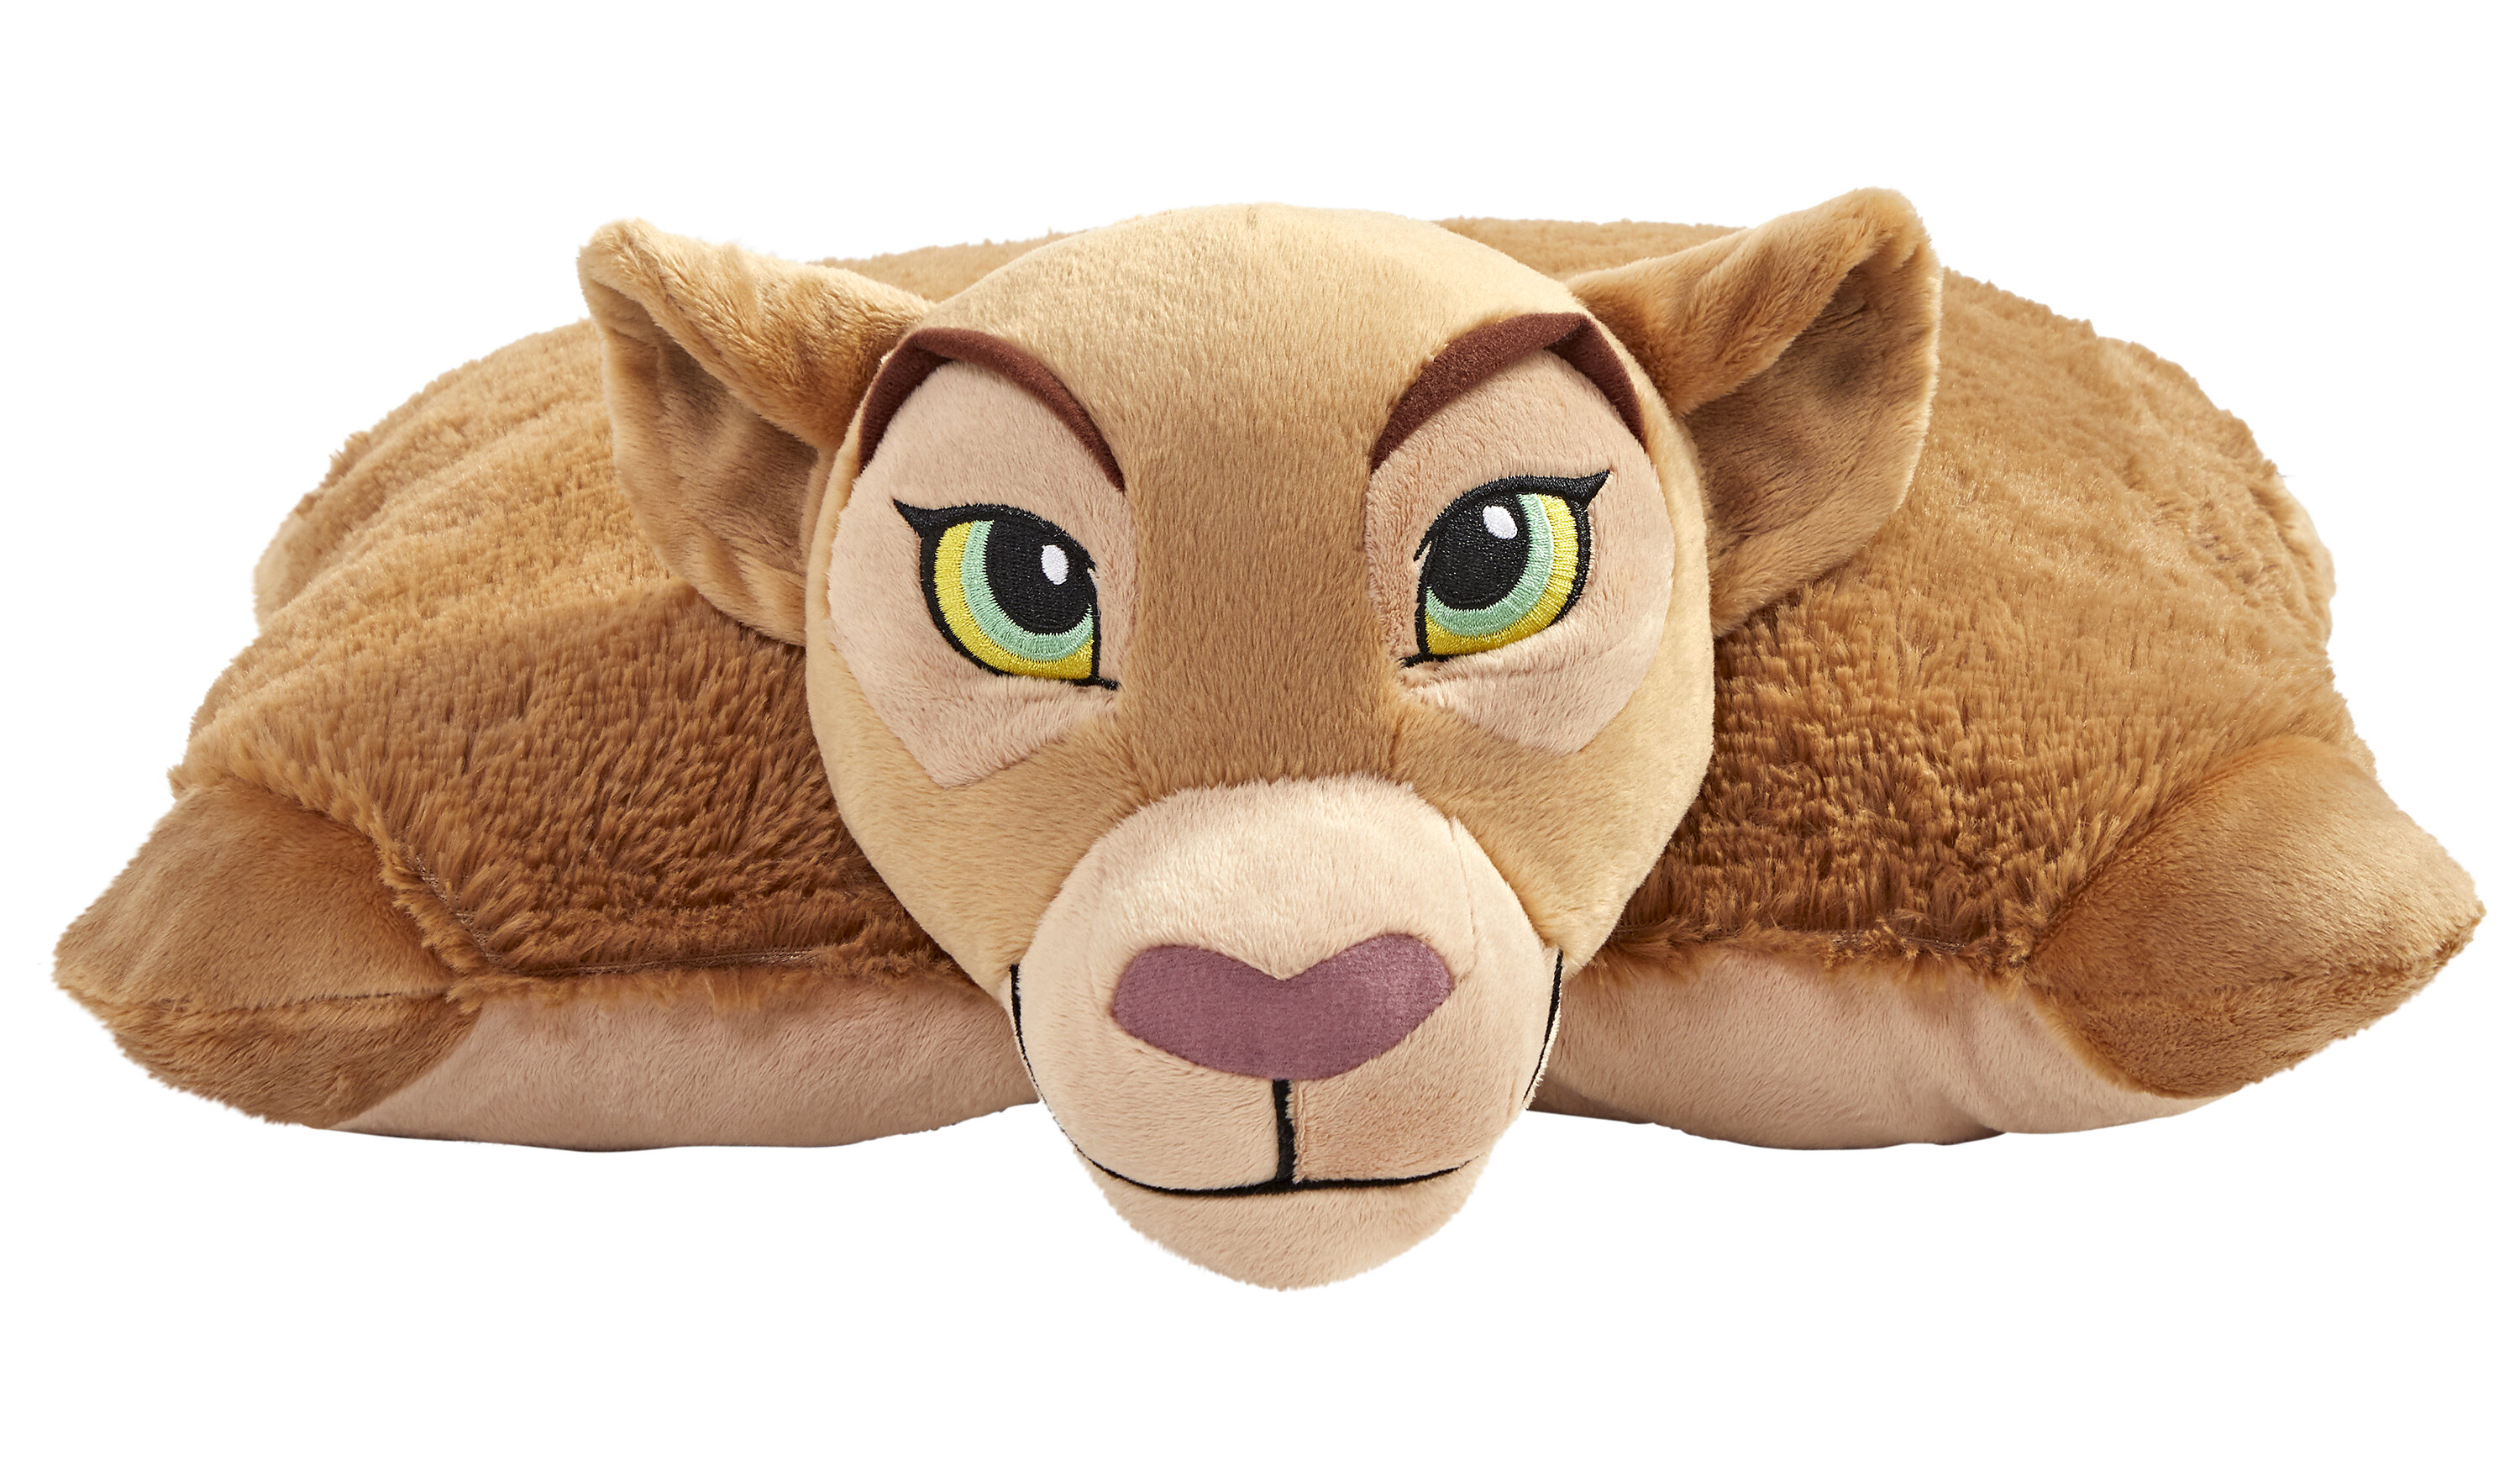 the lion king teddy